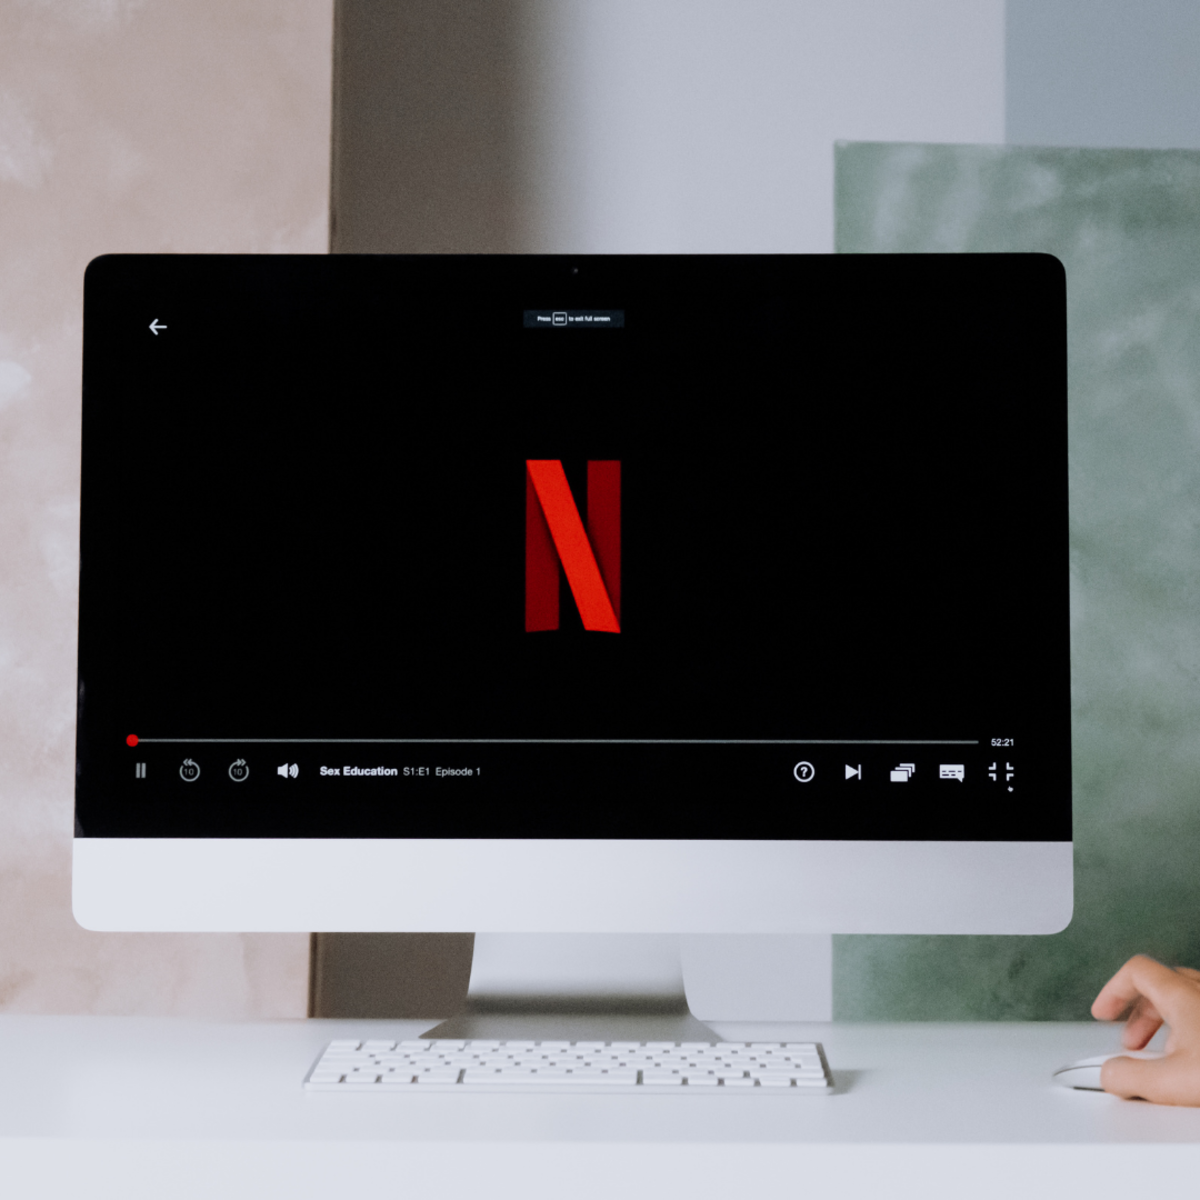 A Complete SWOT Analysis of Netflix